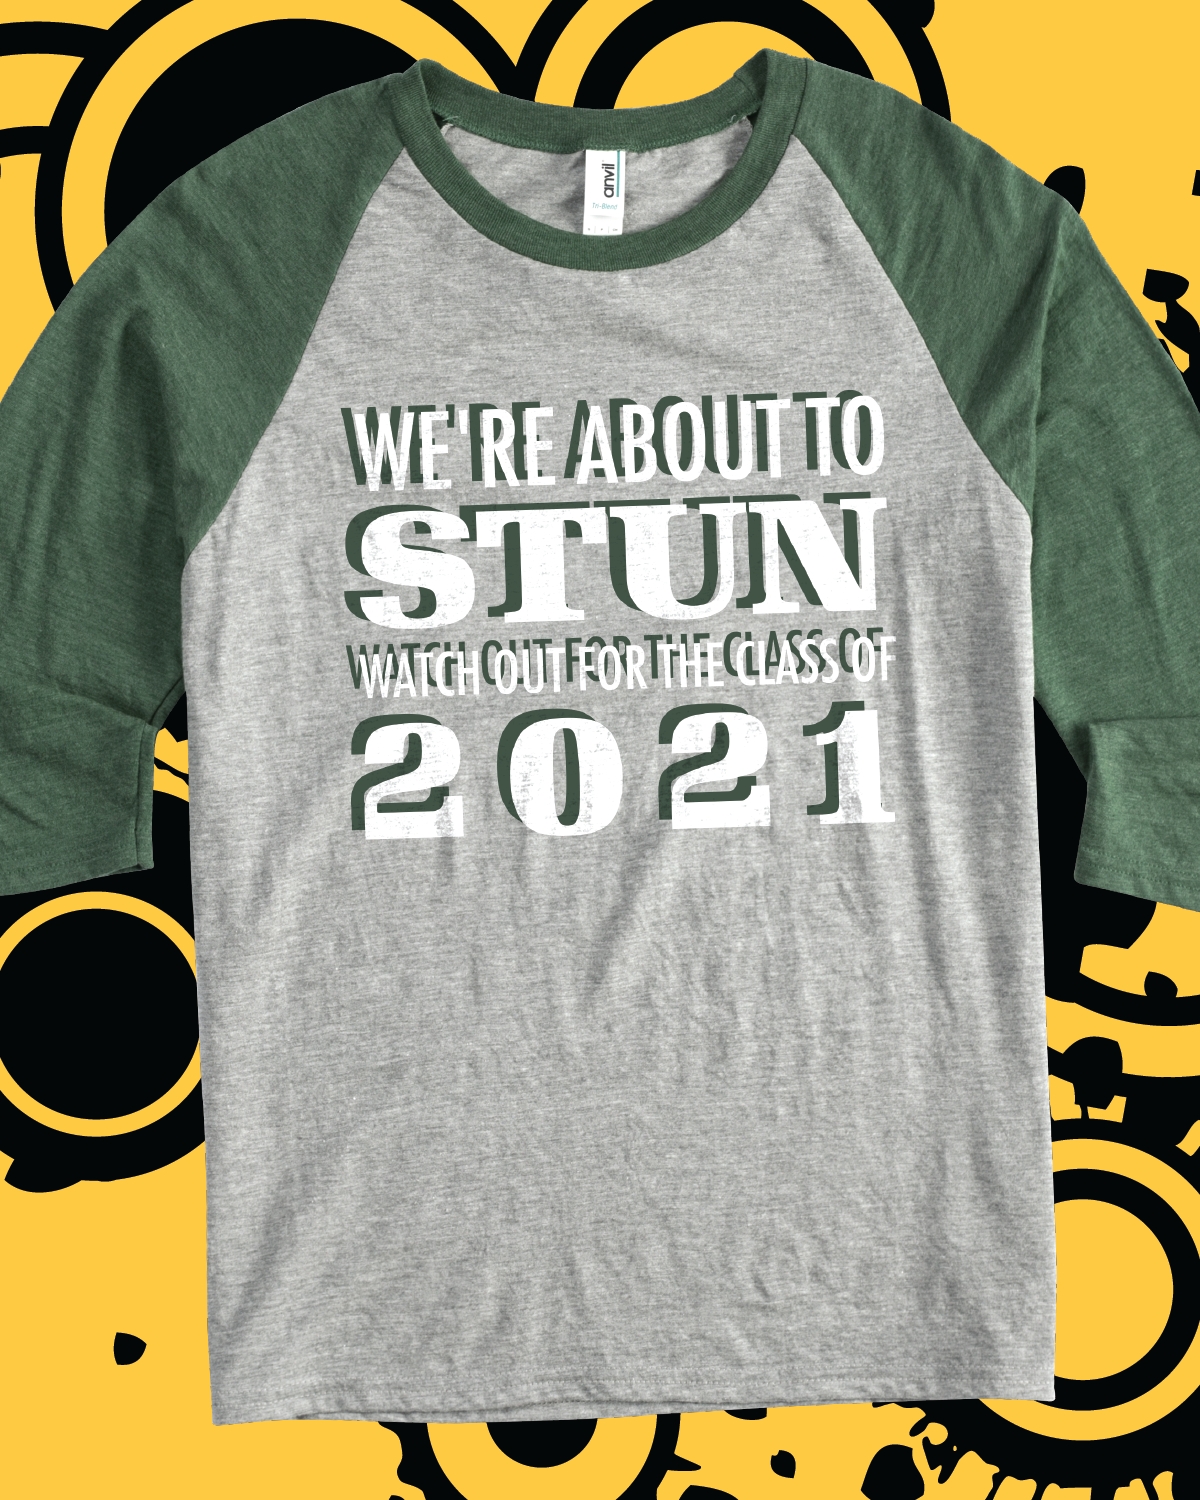 10 Gorgeous Homecoming T Shirt Design Ideas were about to stun watch out for the class of 2021 design idea 1 2022